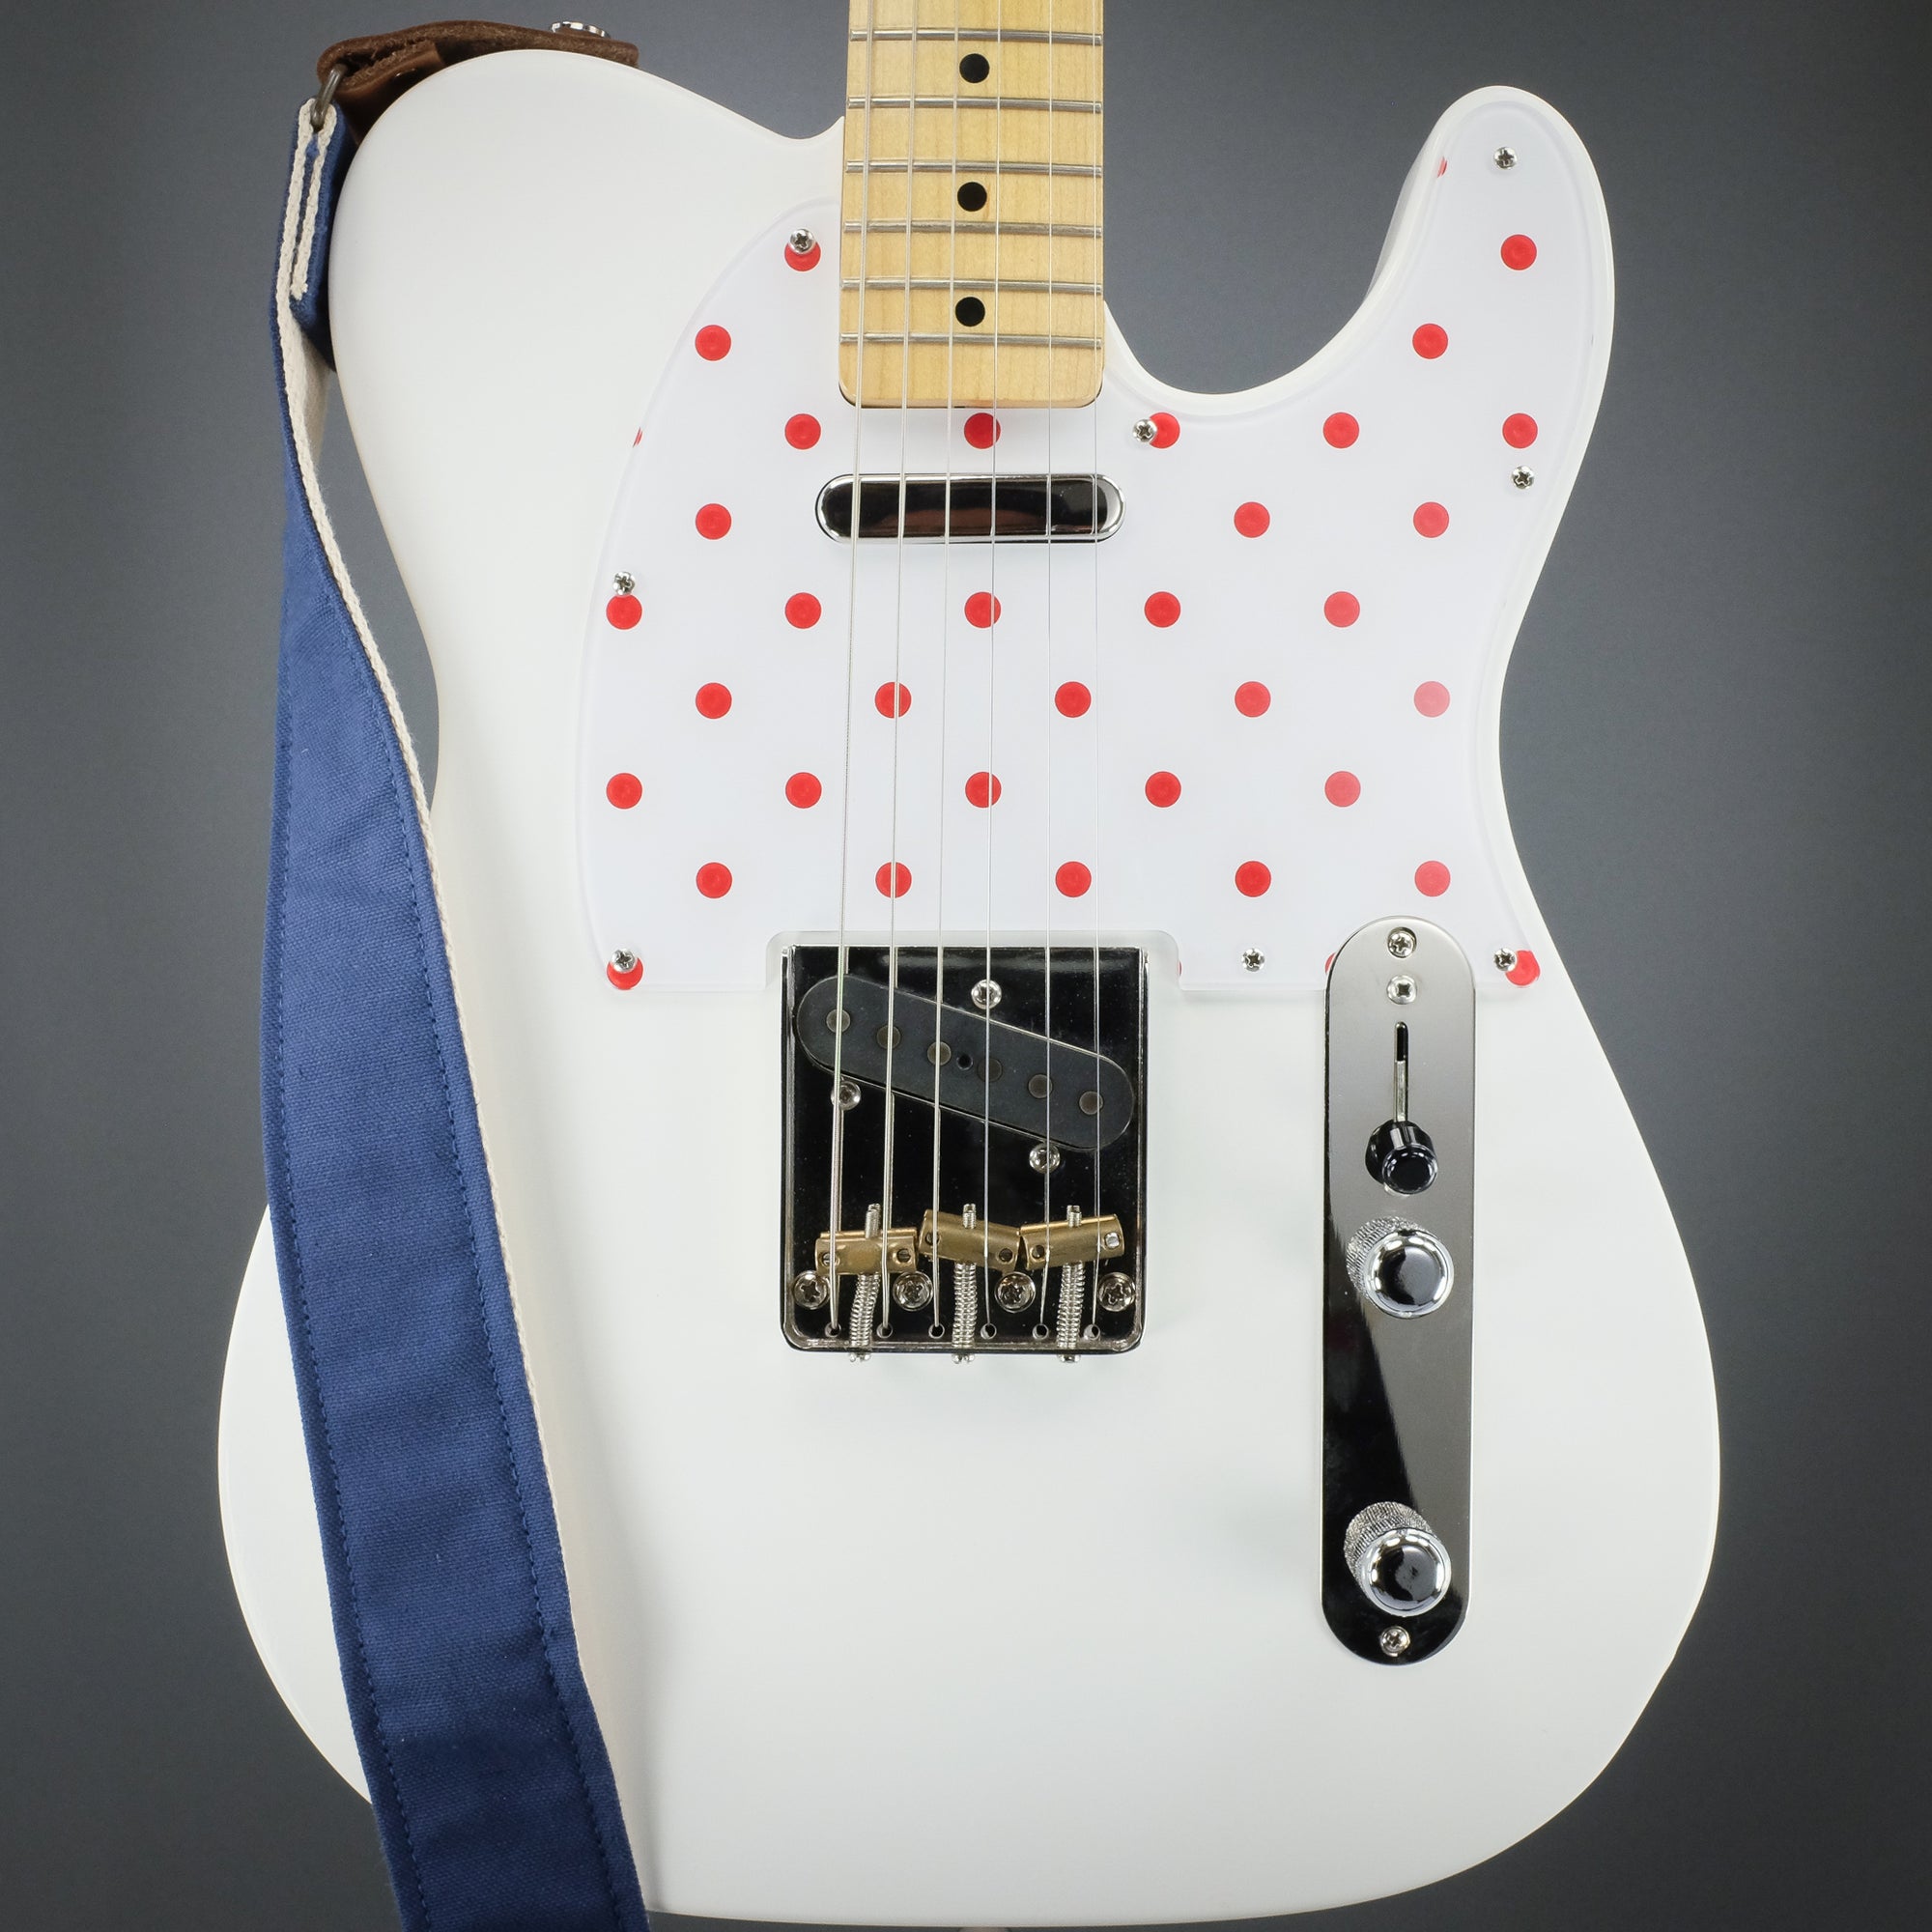 Peggy Sue - Telecaster Pickguard - Candy Apple Red on White